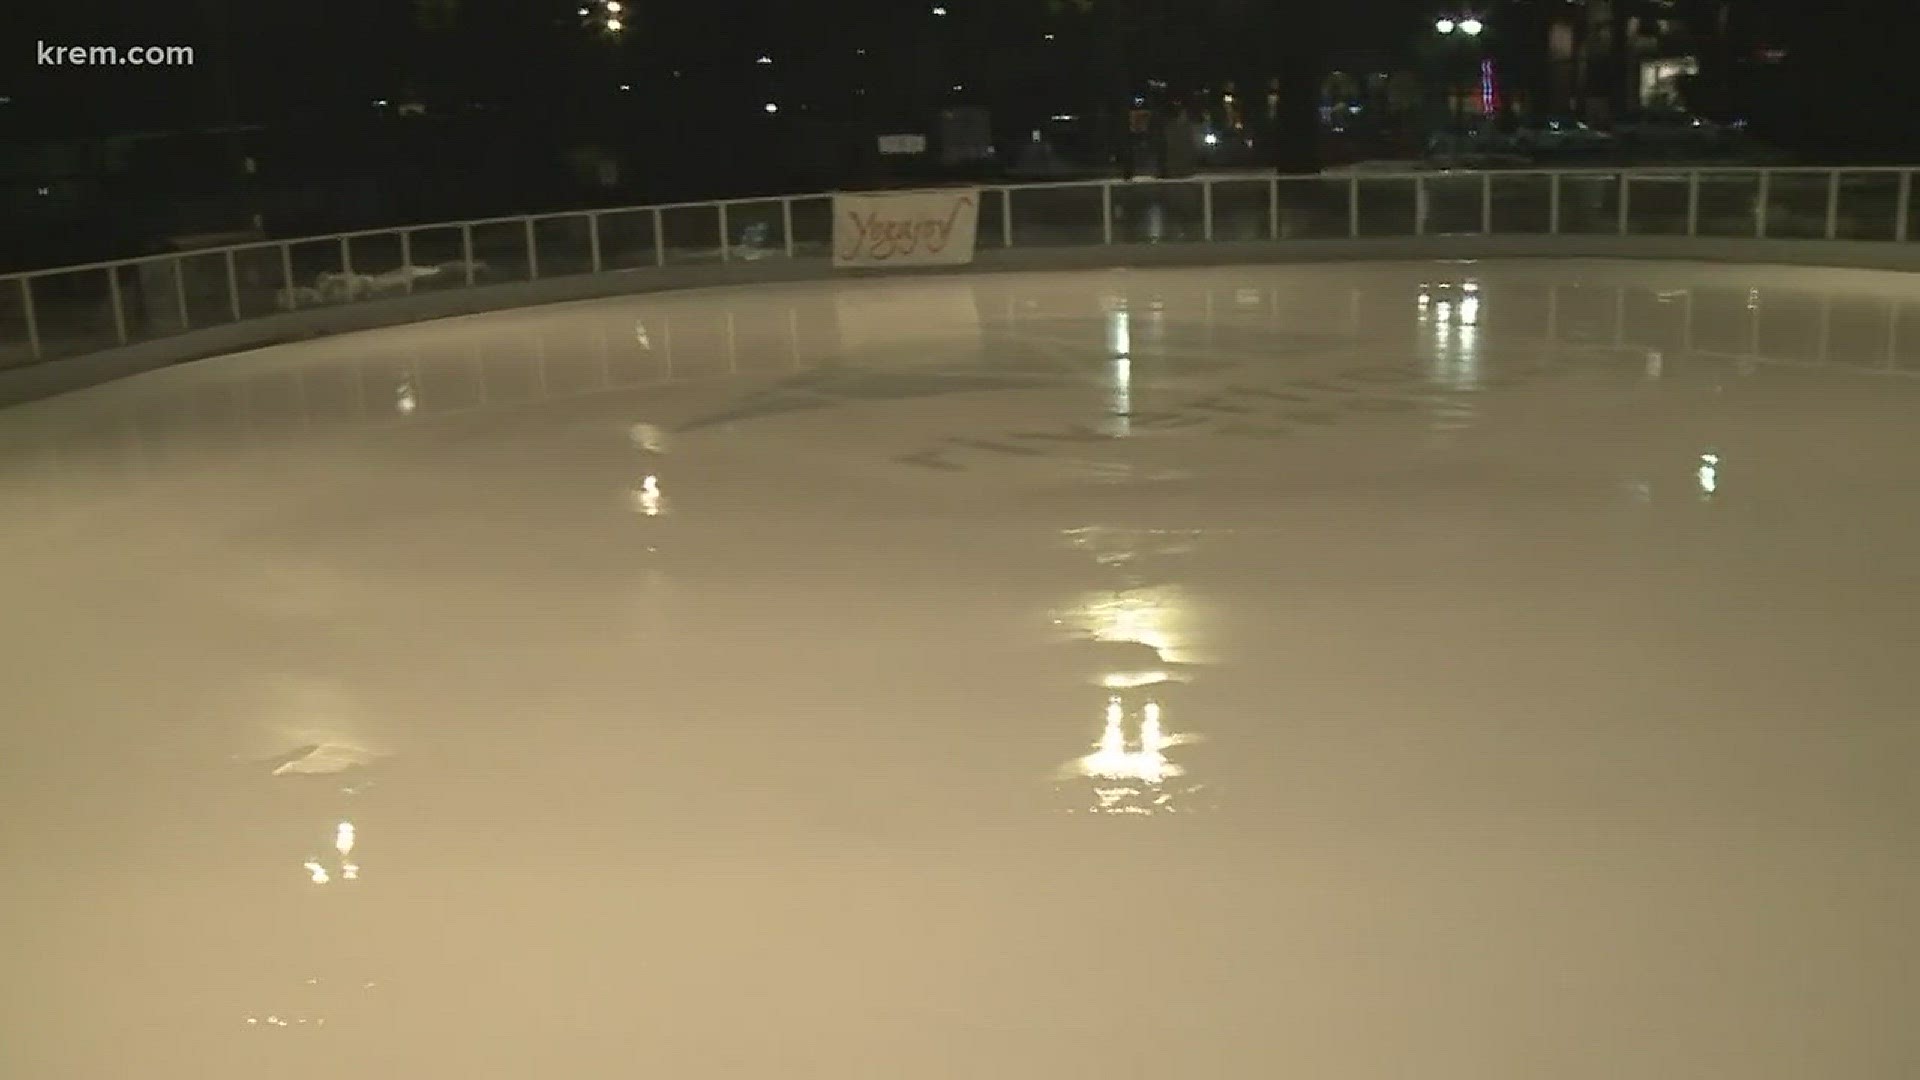 KREM 2's Laura Papetti was at the ice ribbon in Riverfront Park to see how it's going tonight!